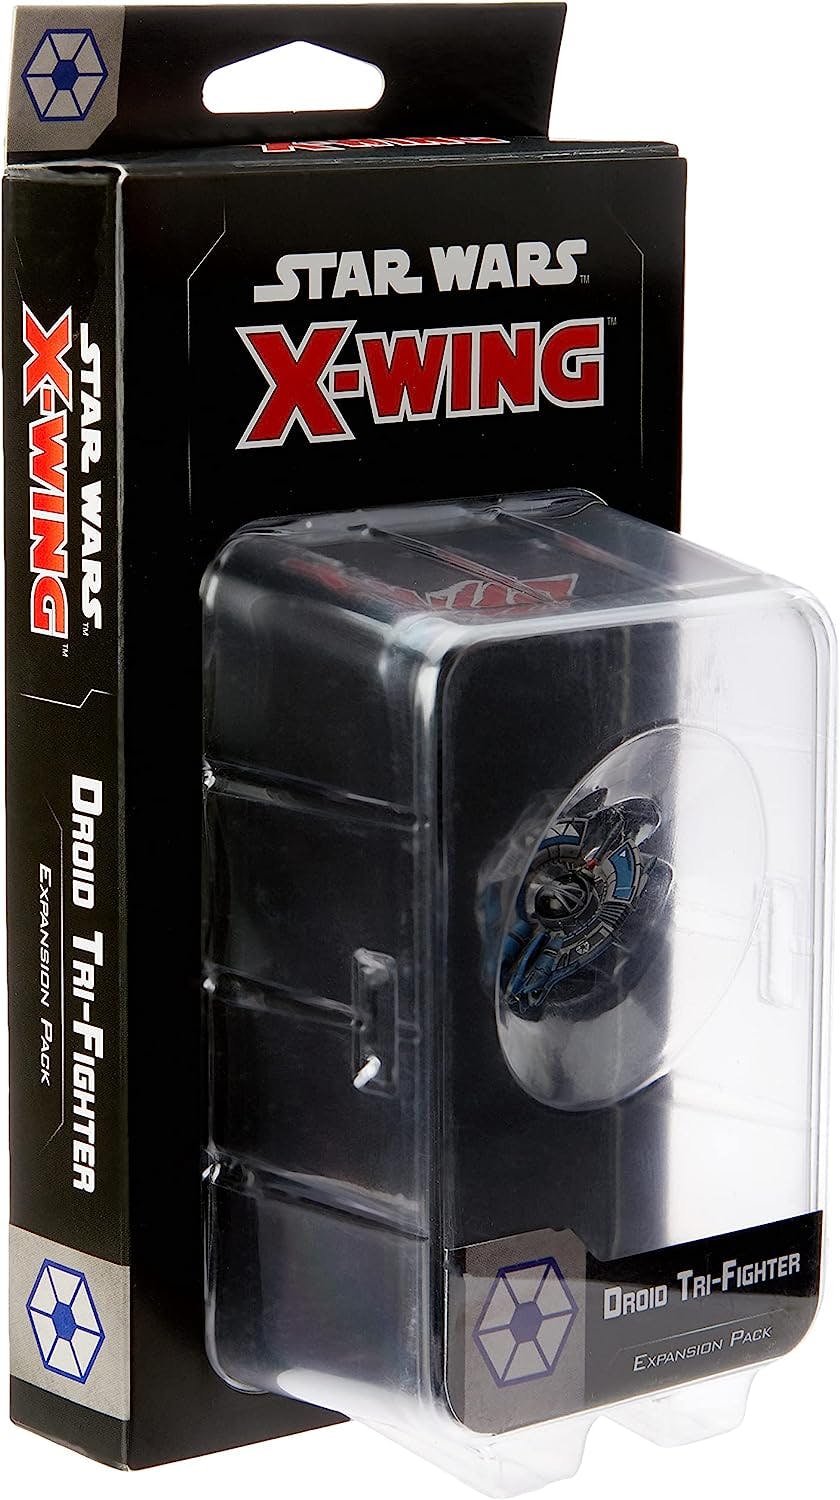 Star Wars X-Wing Miniatures Game: Droid Tri-Fighter EXPANSION PACK - 71SAC3LVWAL._AC_SL1500